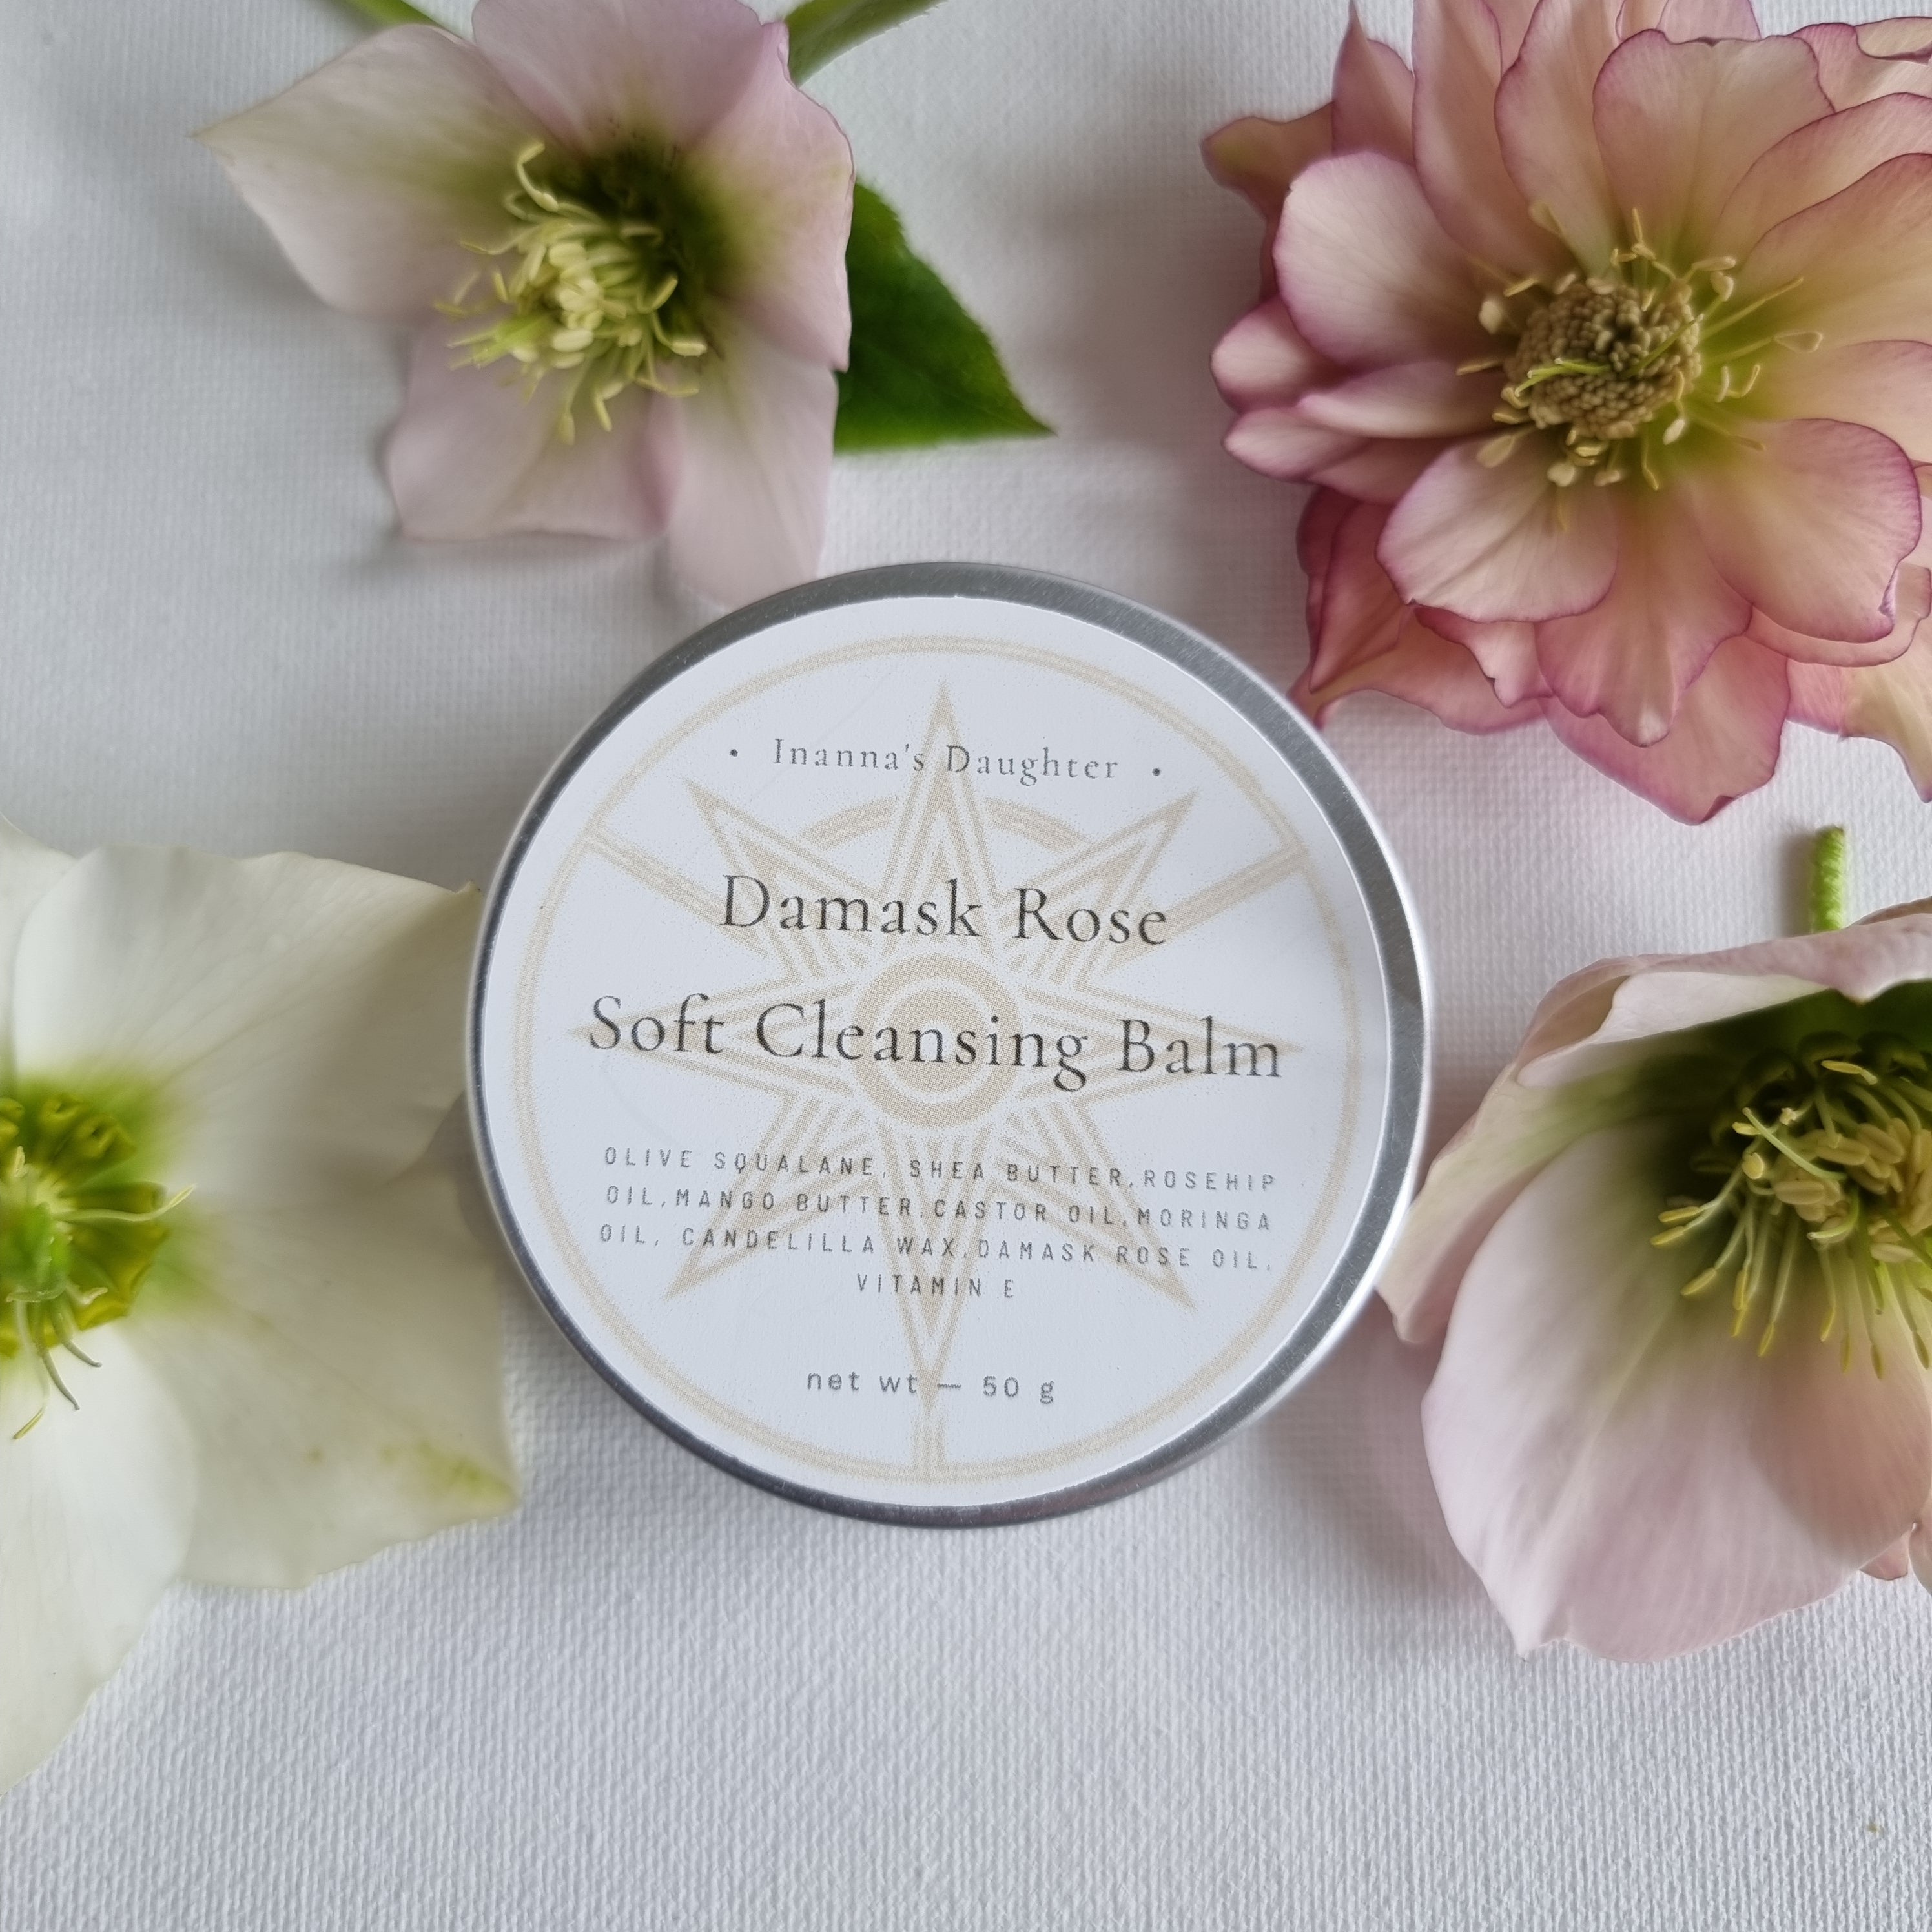 Damask Rose Soft Cleansing Balm - For normal to dry skin freeshipping - Inanna's Daughter Shampoo & Conditioner Bars